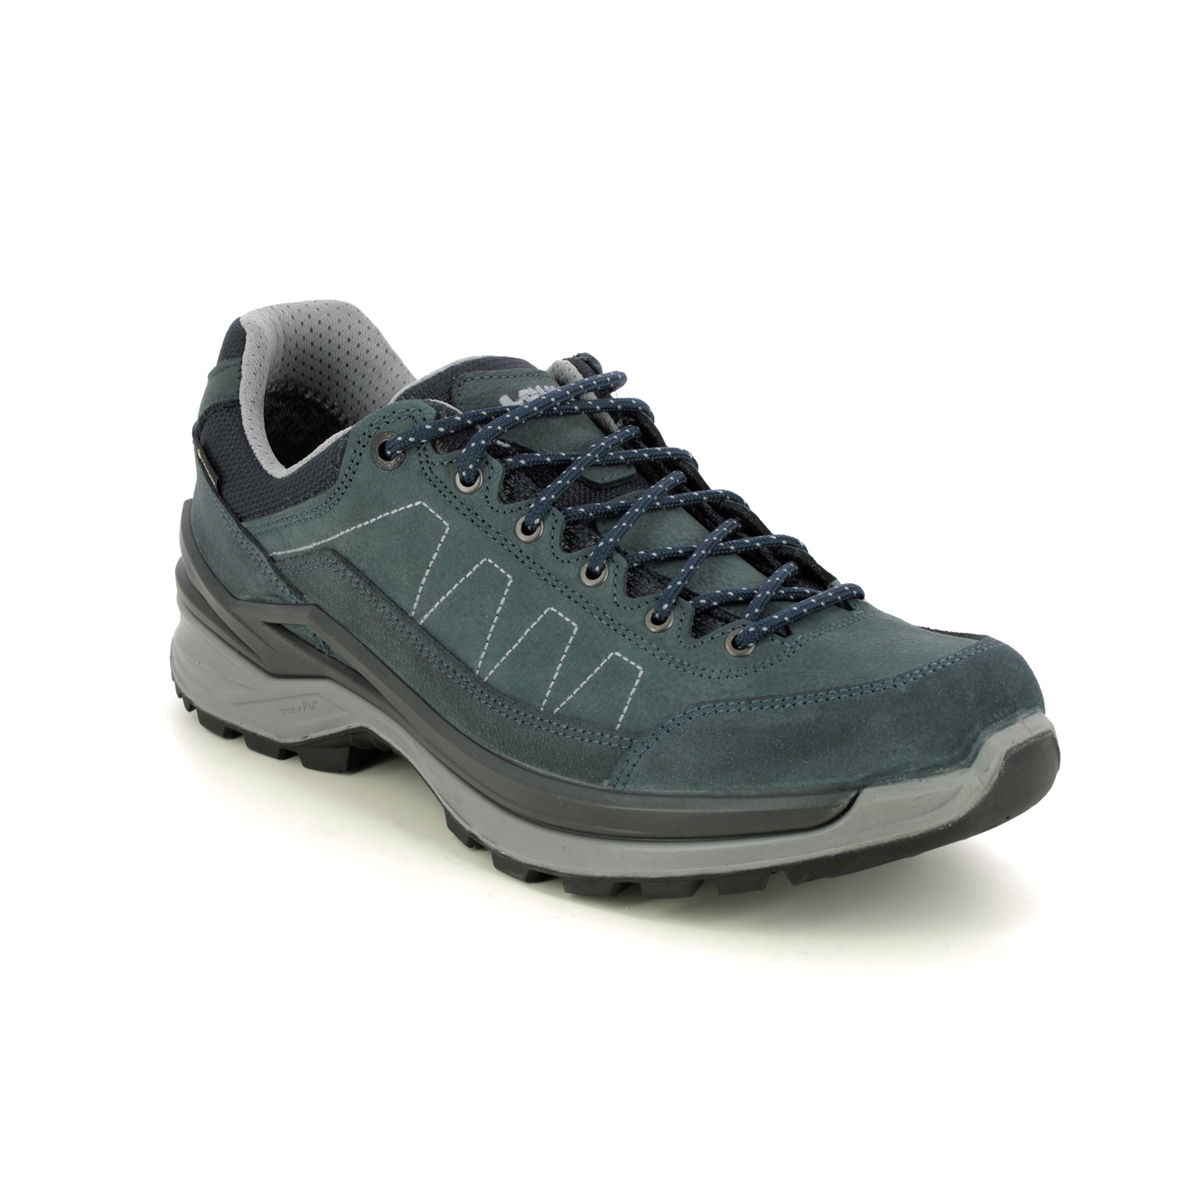 Lowa Toro Pro Gtx Lo Mens Walking Shoes In Navy Leather 310931-6130 In Regular Fit Mens Uk Size 11 In Plain Navy Leather